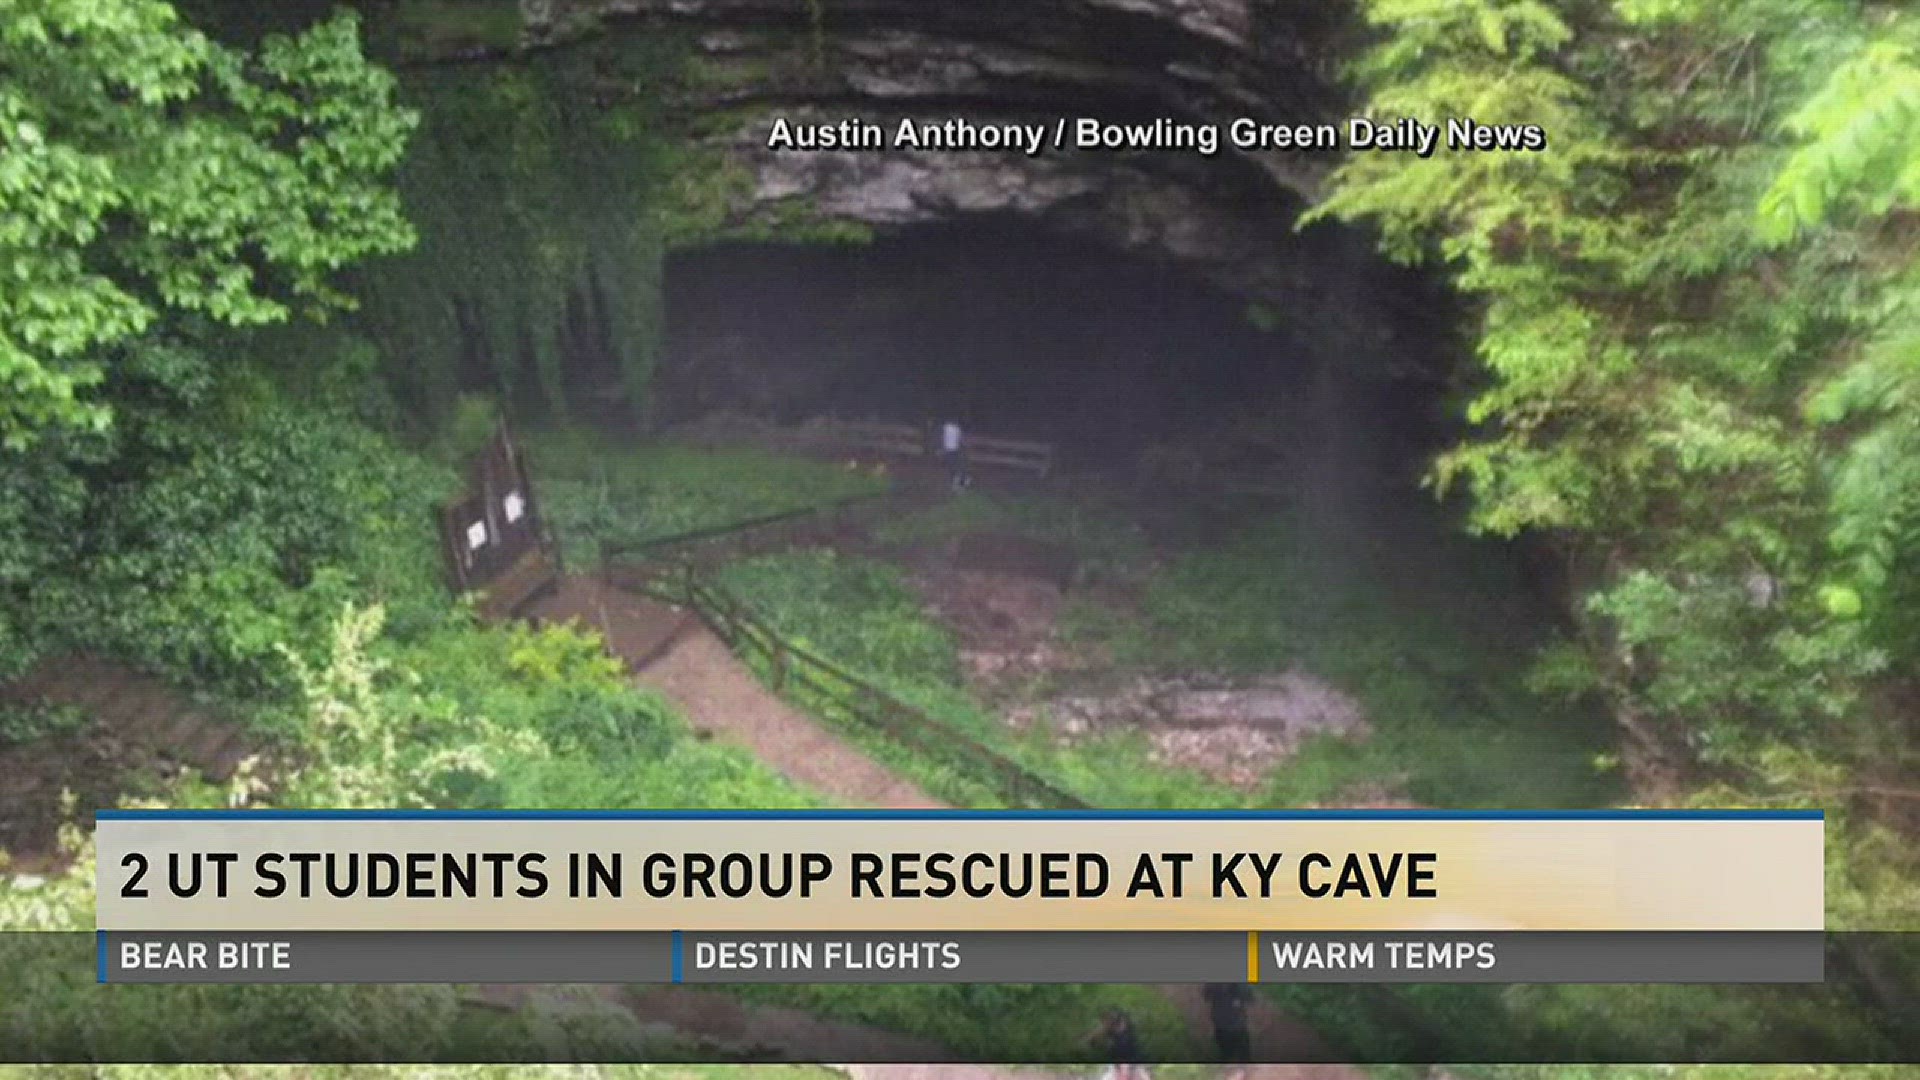 Two University of Tennessee Knoxville geology students were rescued, along with the rest of their tour group, from a cave after a heavy downpour caused flash flooding in Horse Cave, Ky.